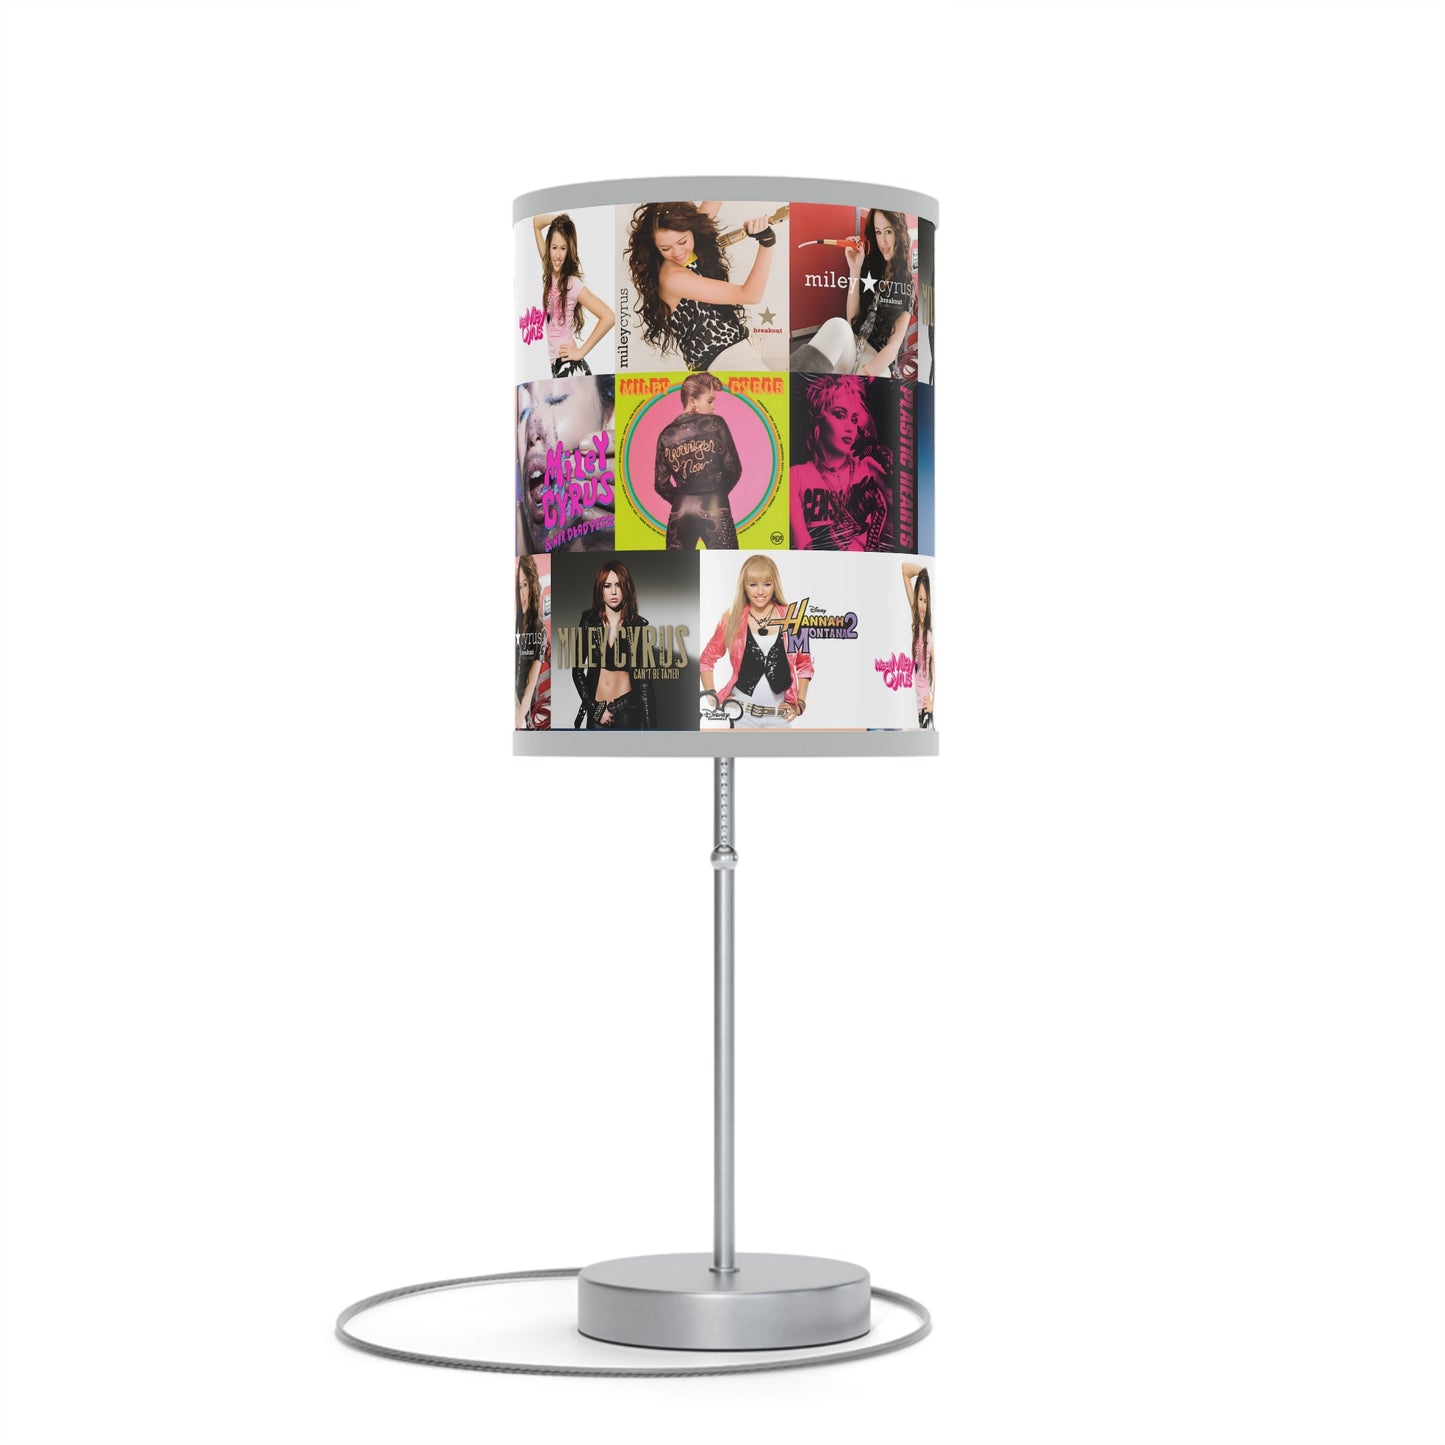 Miley Cyrus Album Cover Collage Lamp on a Stand